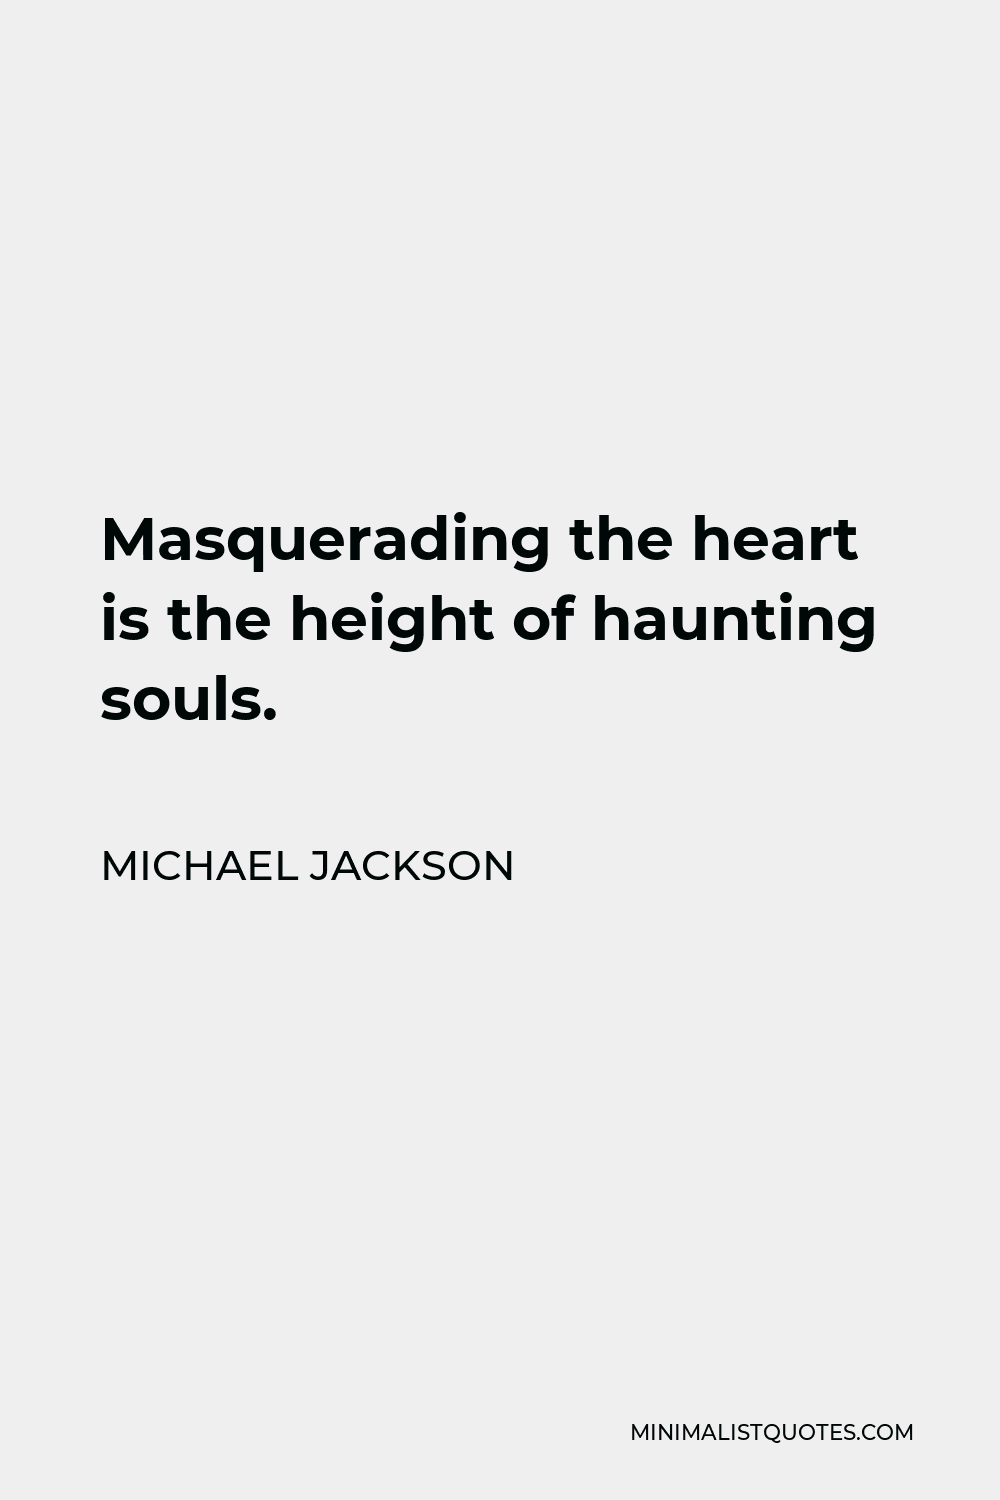 Michael Jackson Quote - Masquerading the heart is the height of haunting souls.